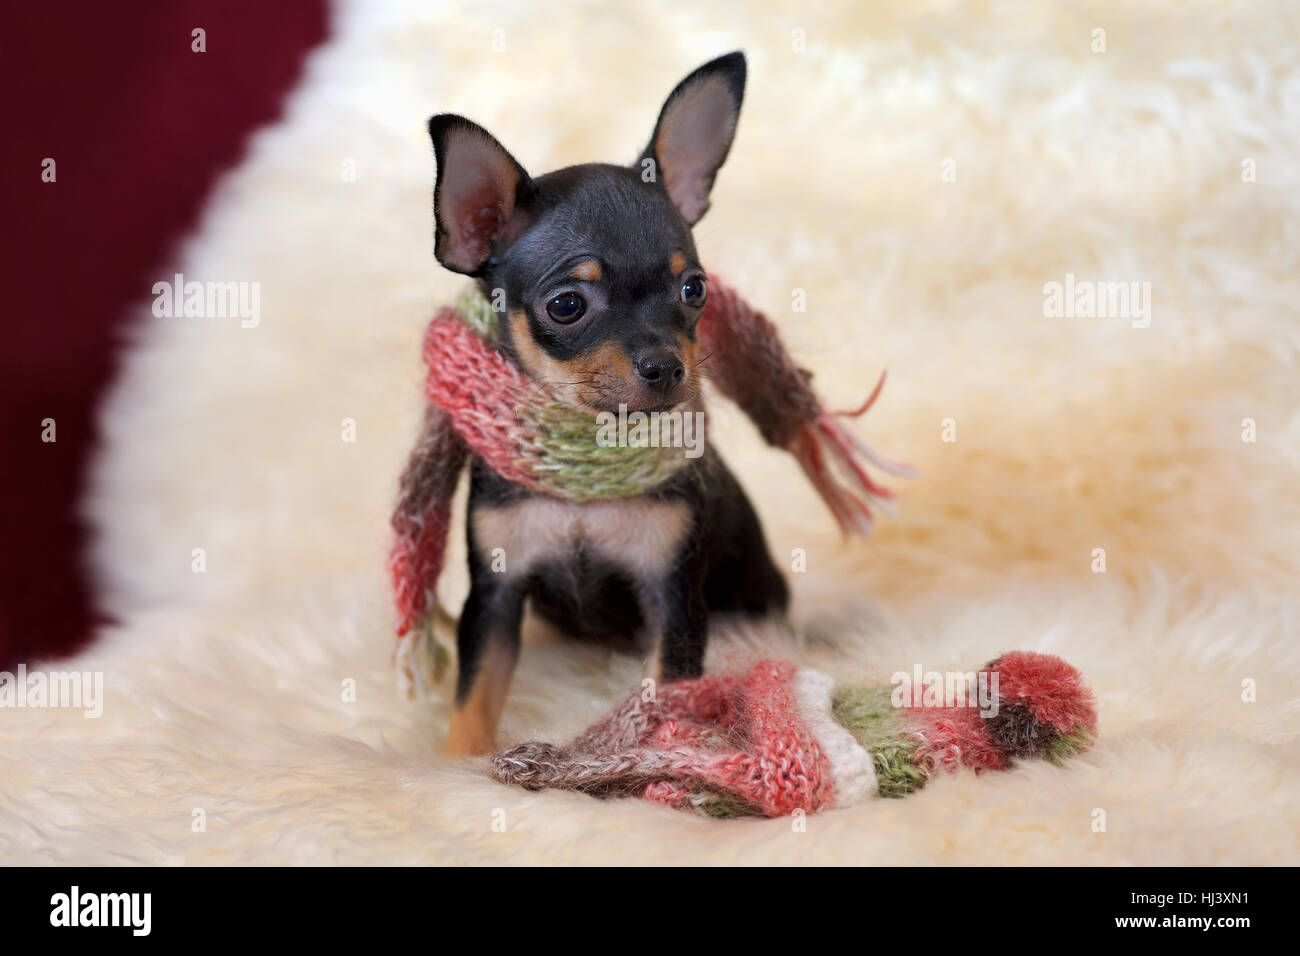 Small black and tan Russkiy toy (Russian toy terrier) dog with scarf Stock Photo